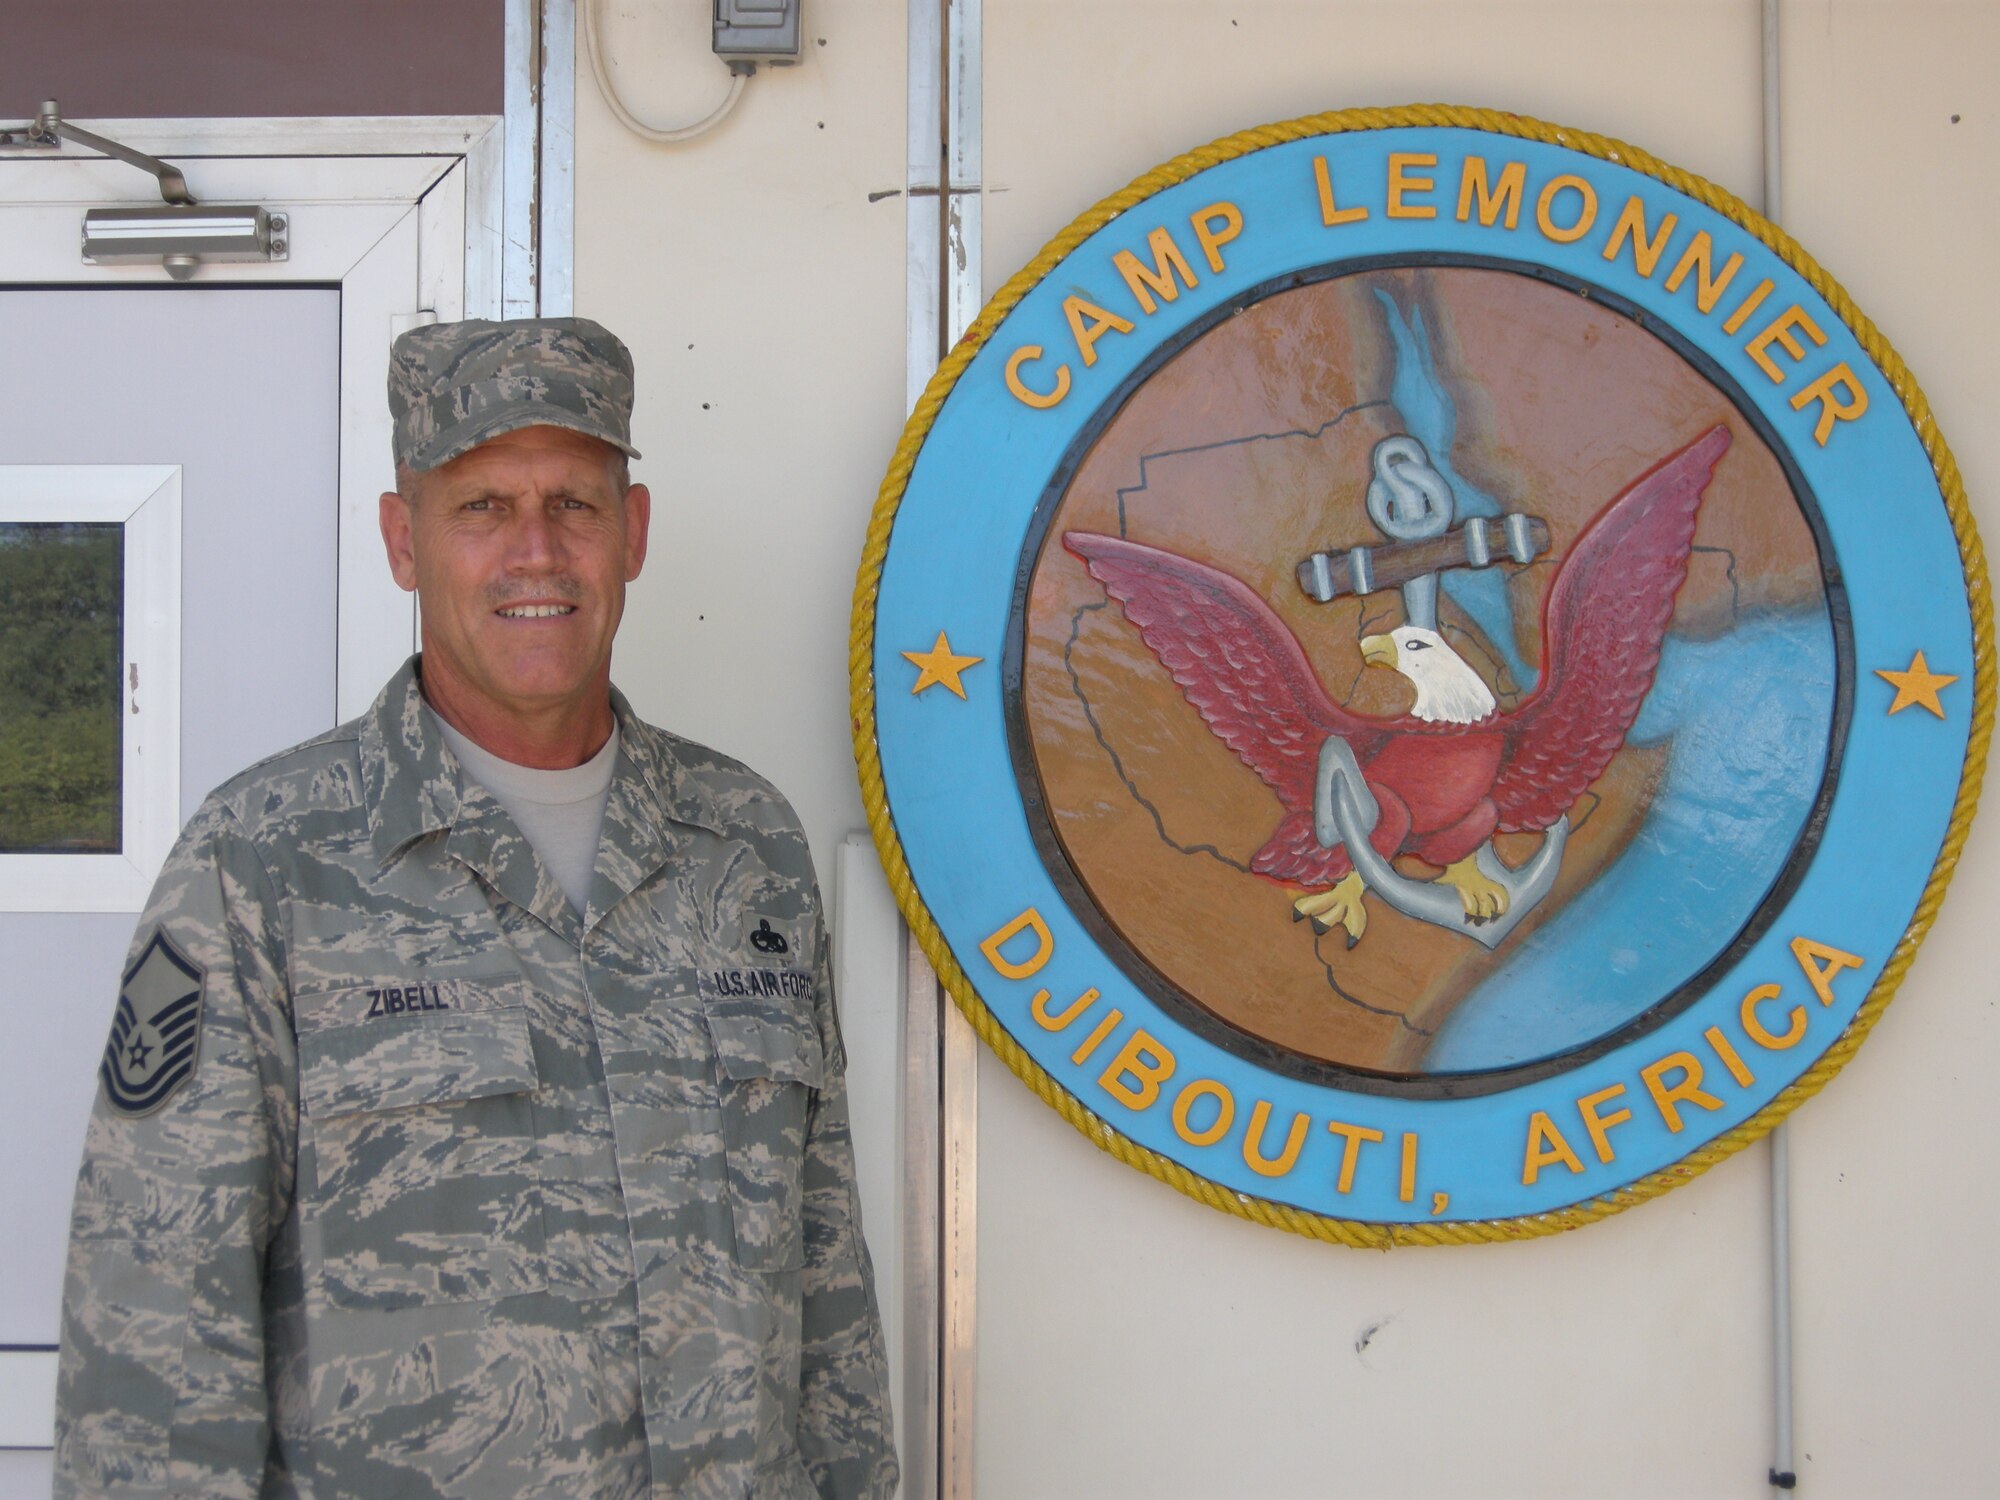 MSgt David Zibell at Camp Lemonnier, Djibouti, Africa where he received the Military Outstanding Volunteer Service Medal.